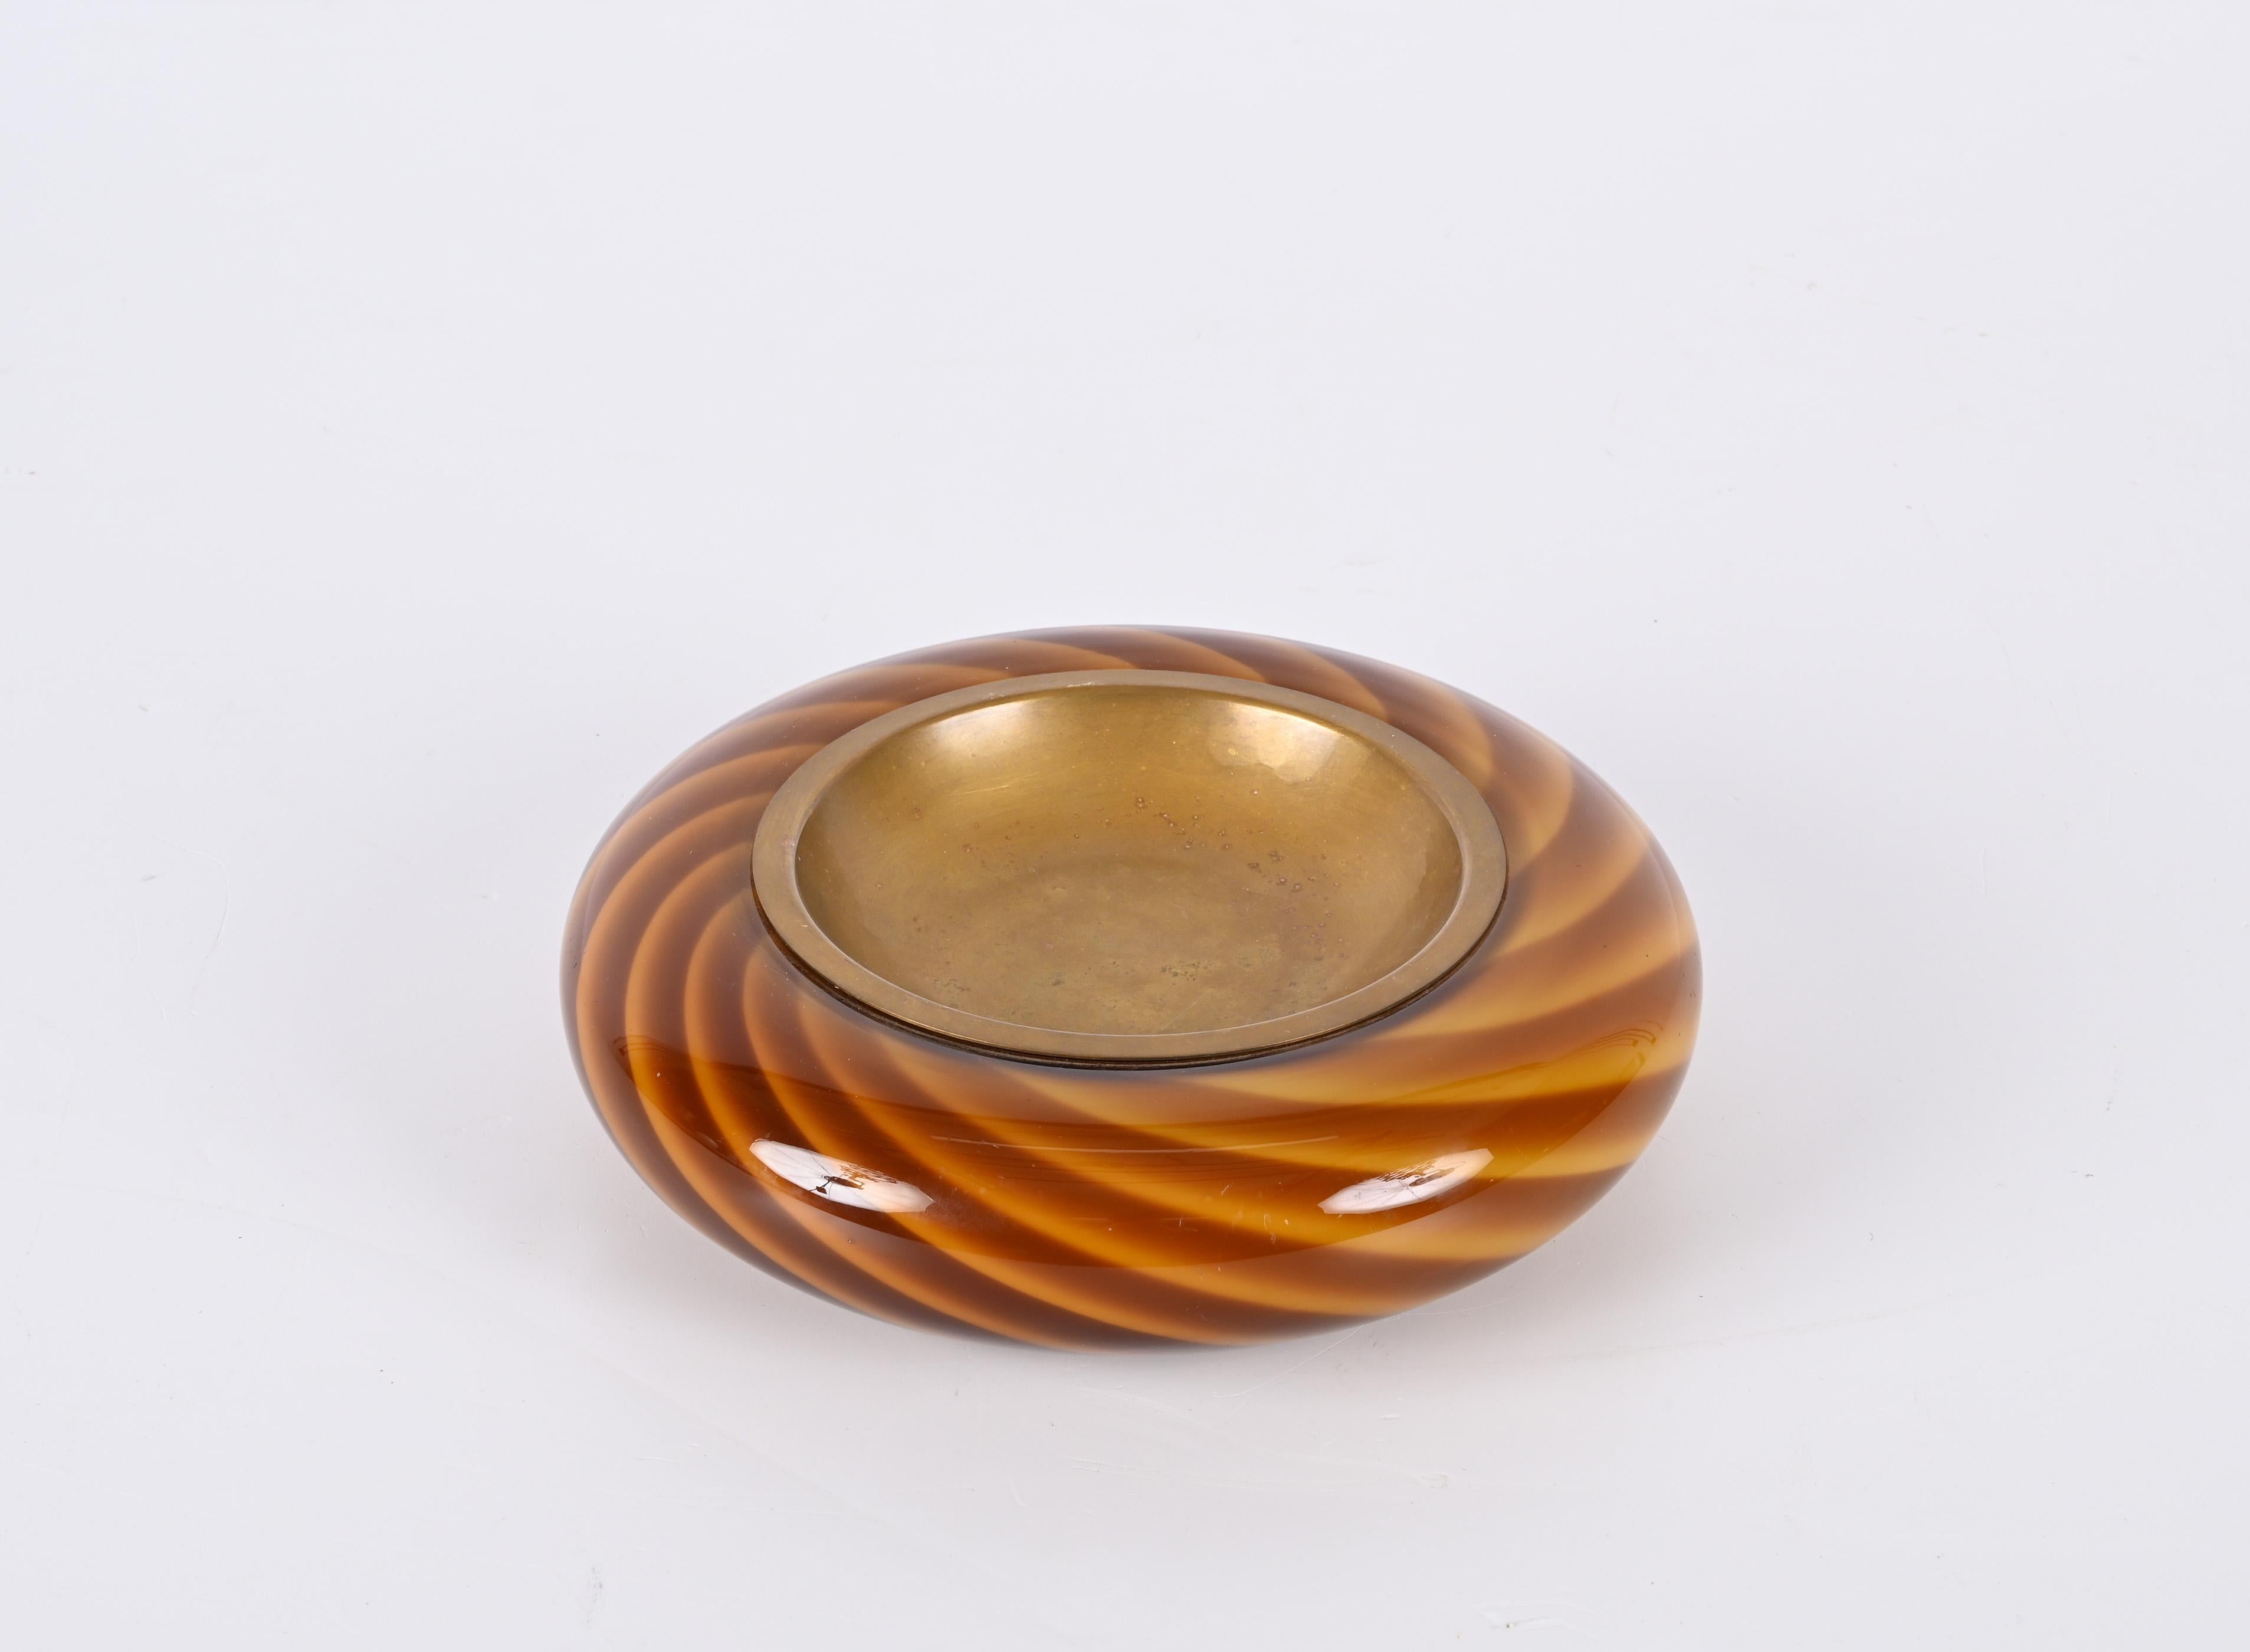 Incredible Midcentury Murano Glass and Brass Circular Italian Ashtray, 1970s. Tommaso Barbi produced this incredible piece during the late 1960s in Italy.

The combination of wonderful Murano glass colours, red and yellow, with a brass plate on top.